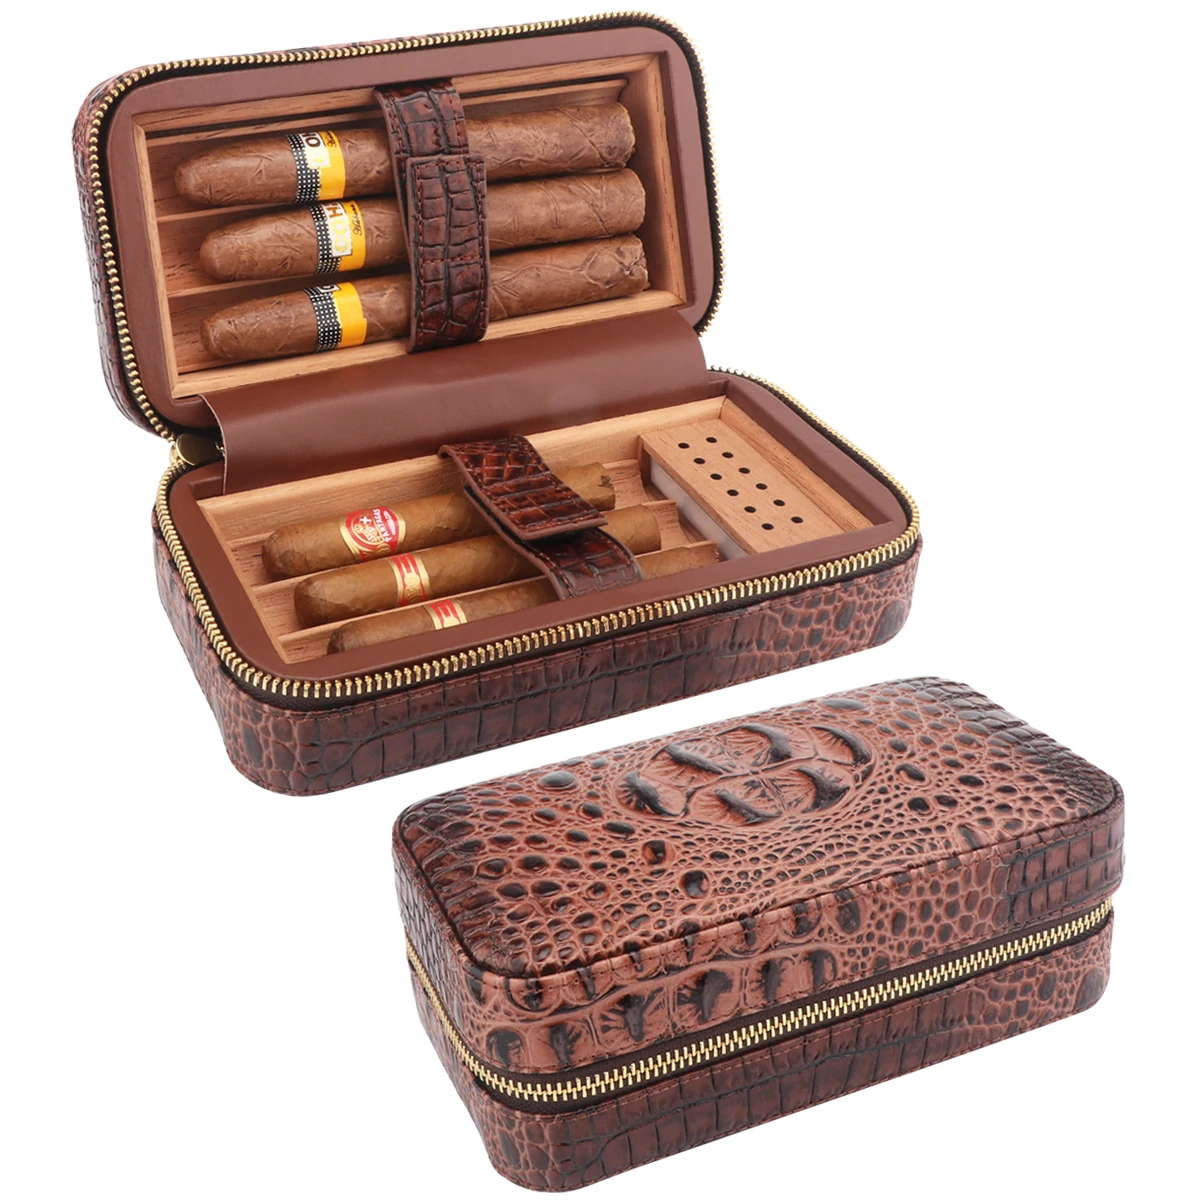 

Xifei Travel 6 Slots Leather Cigar Humidor Case Cedar Wood With Humidifier&Dropper Portable Bag Smoking Accessories For COHIBA